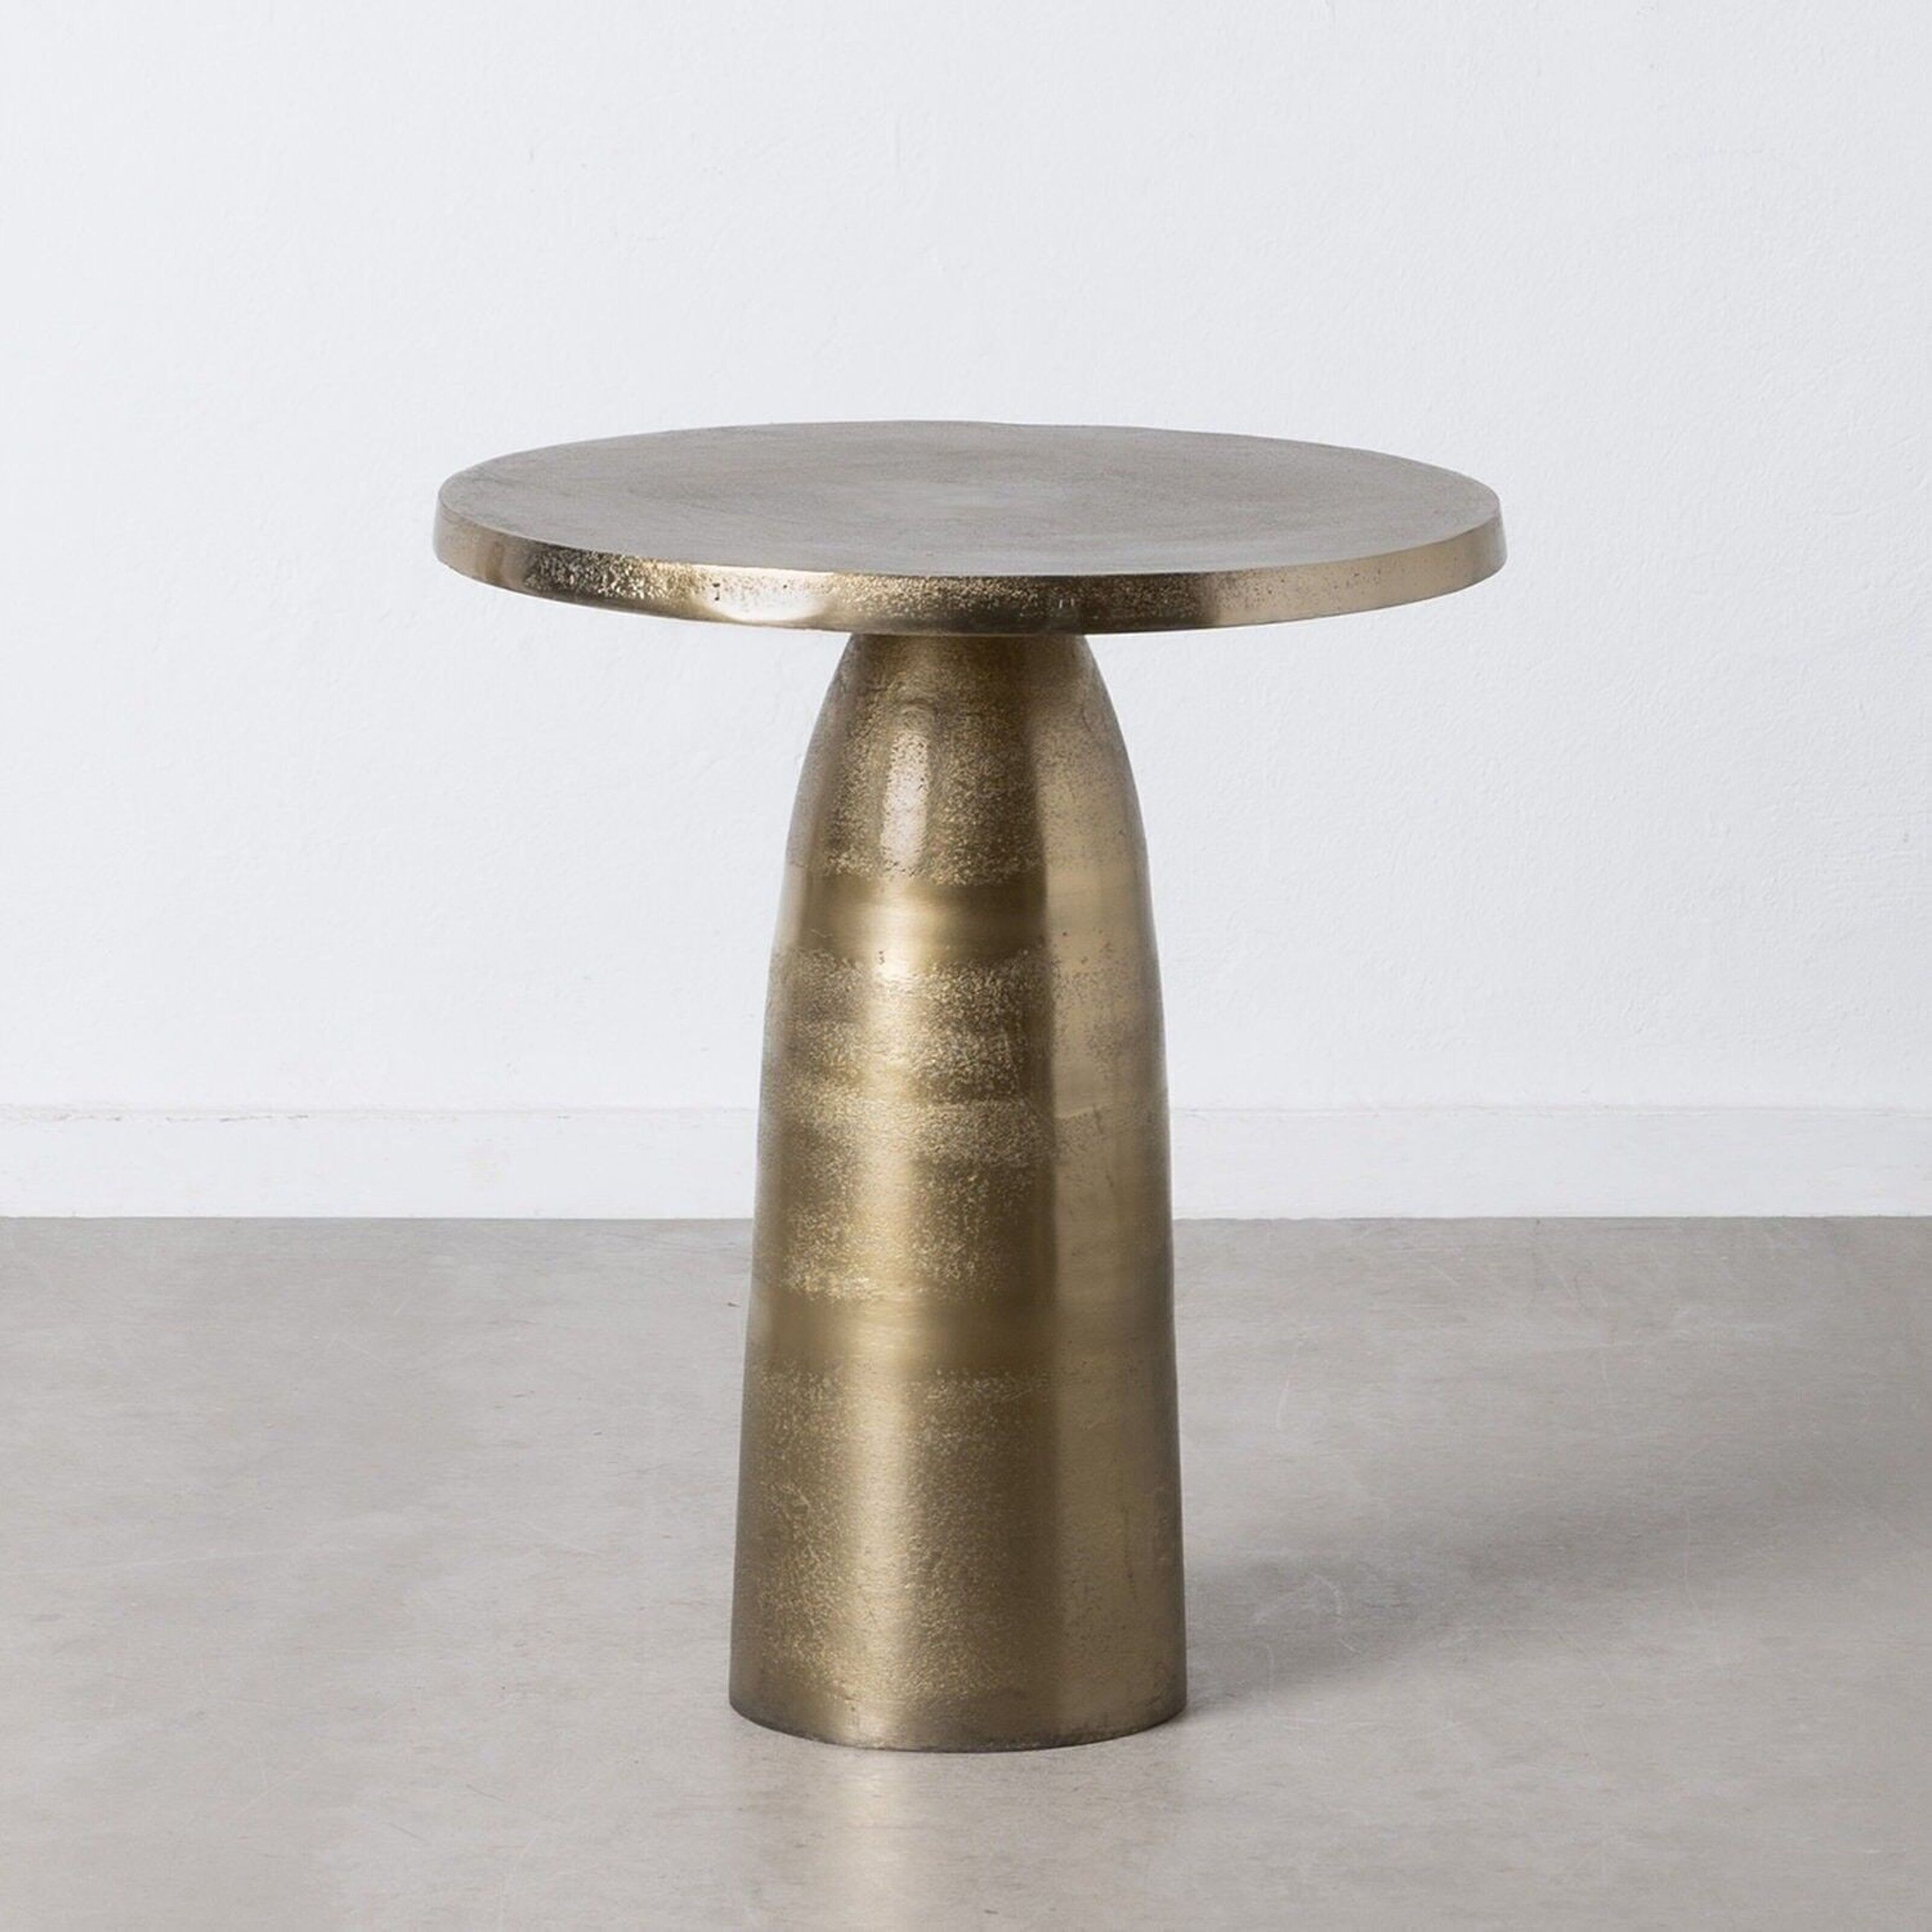 TABLE wholesale GOLD LIVING ST605361 ROOM ALUMINUM Buy SIDE